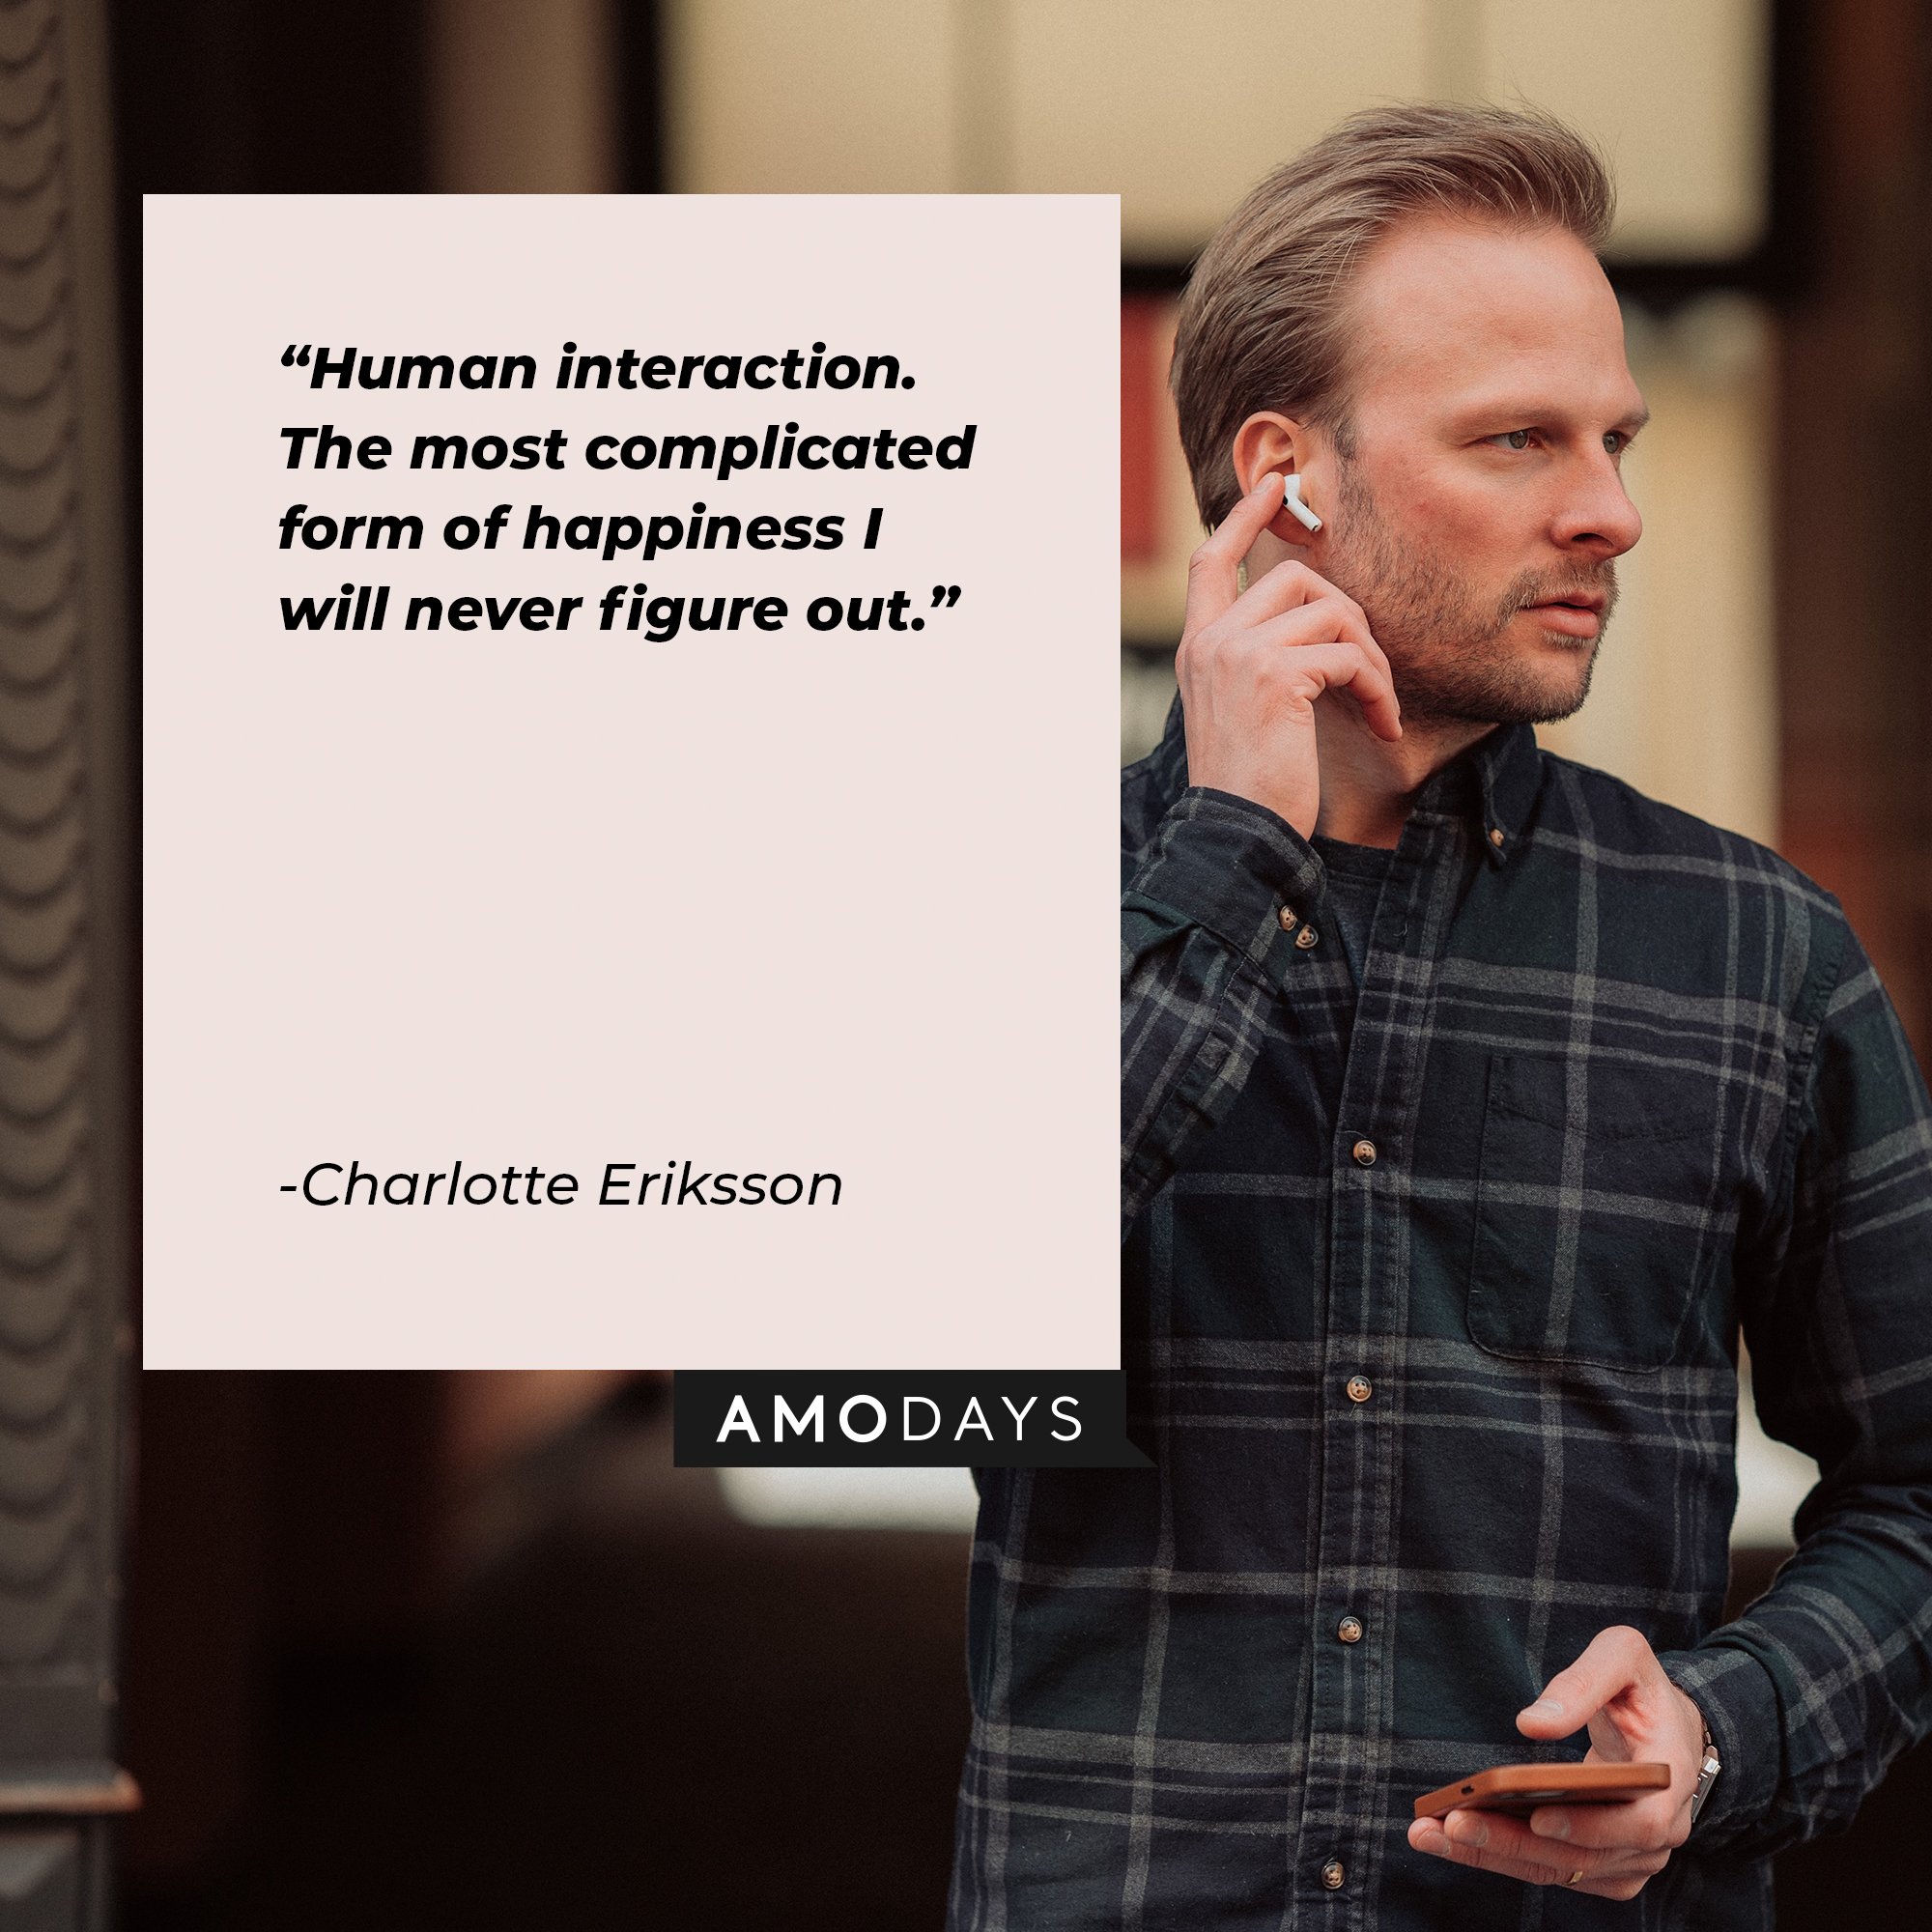 Charlotte Eriksson's quote: “Human interaction. The most complicated form of happiness I will never figure out.” | Image: AmoDays